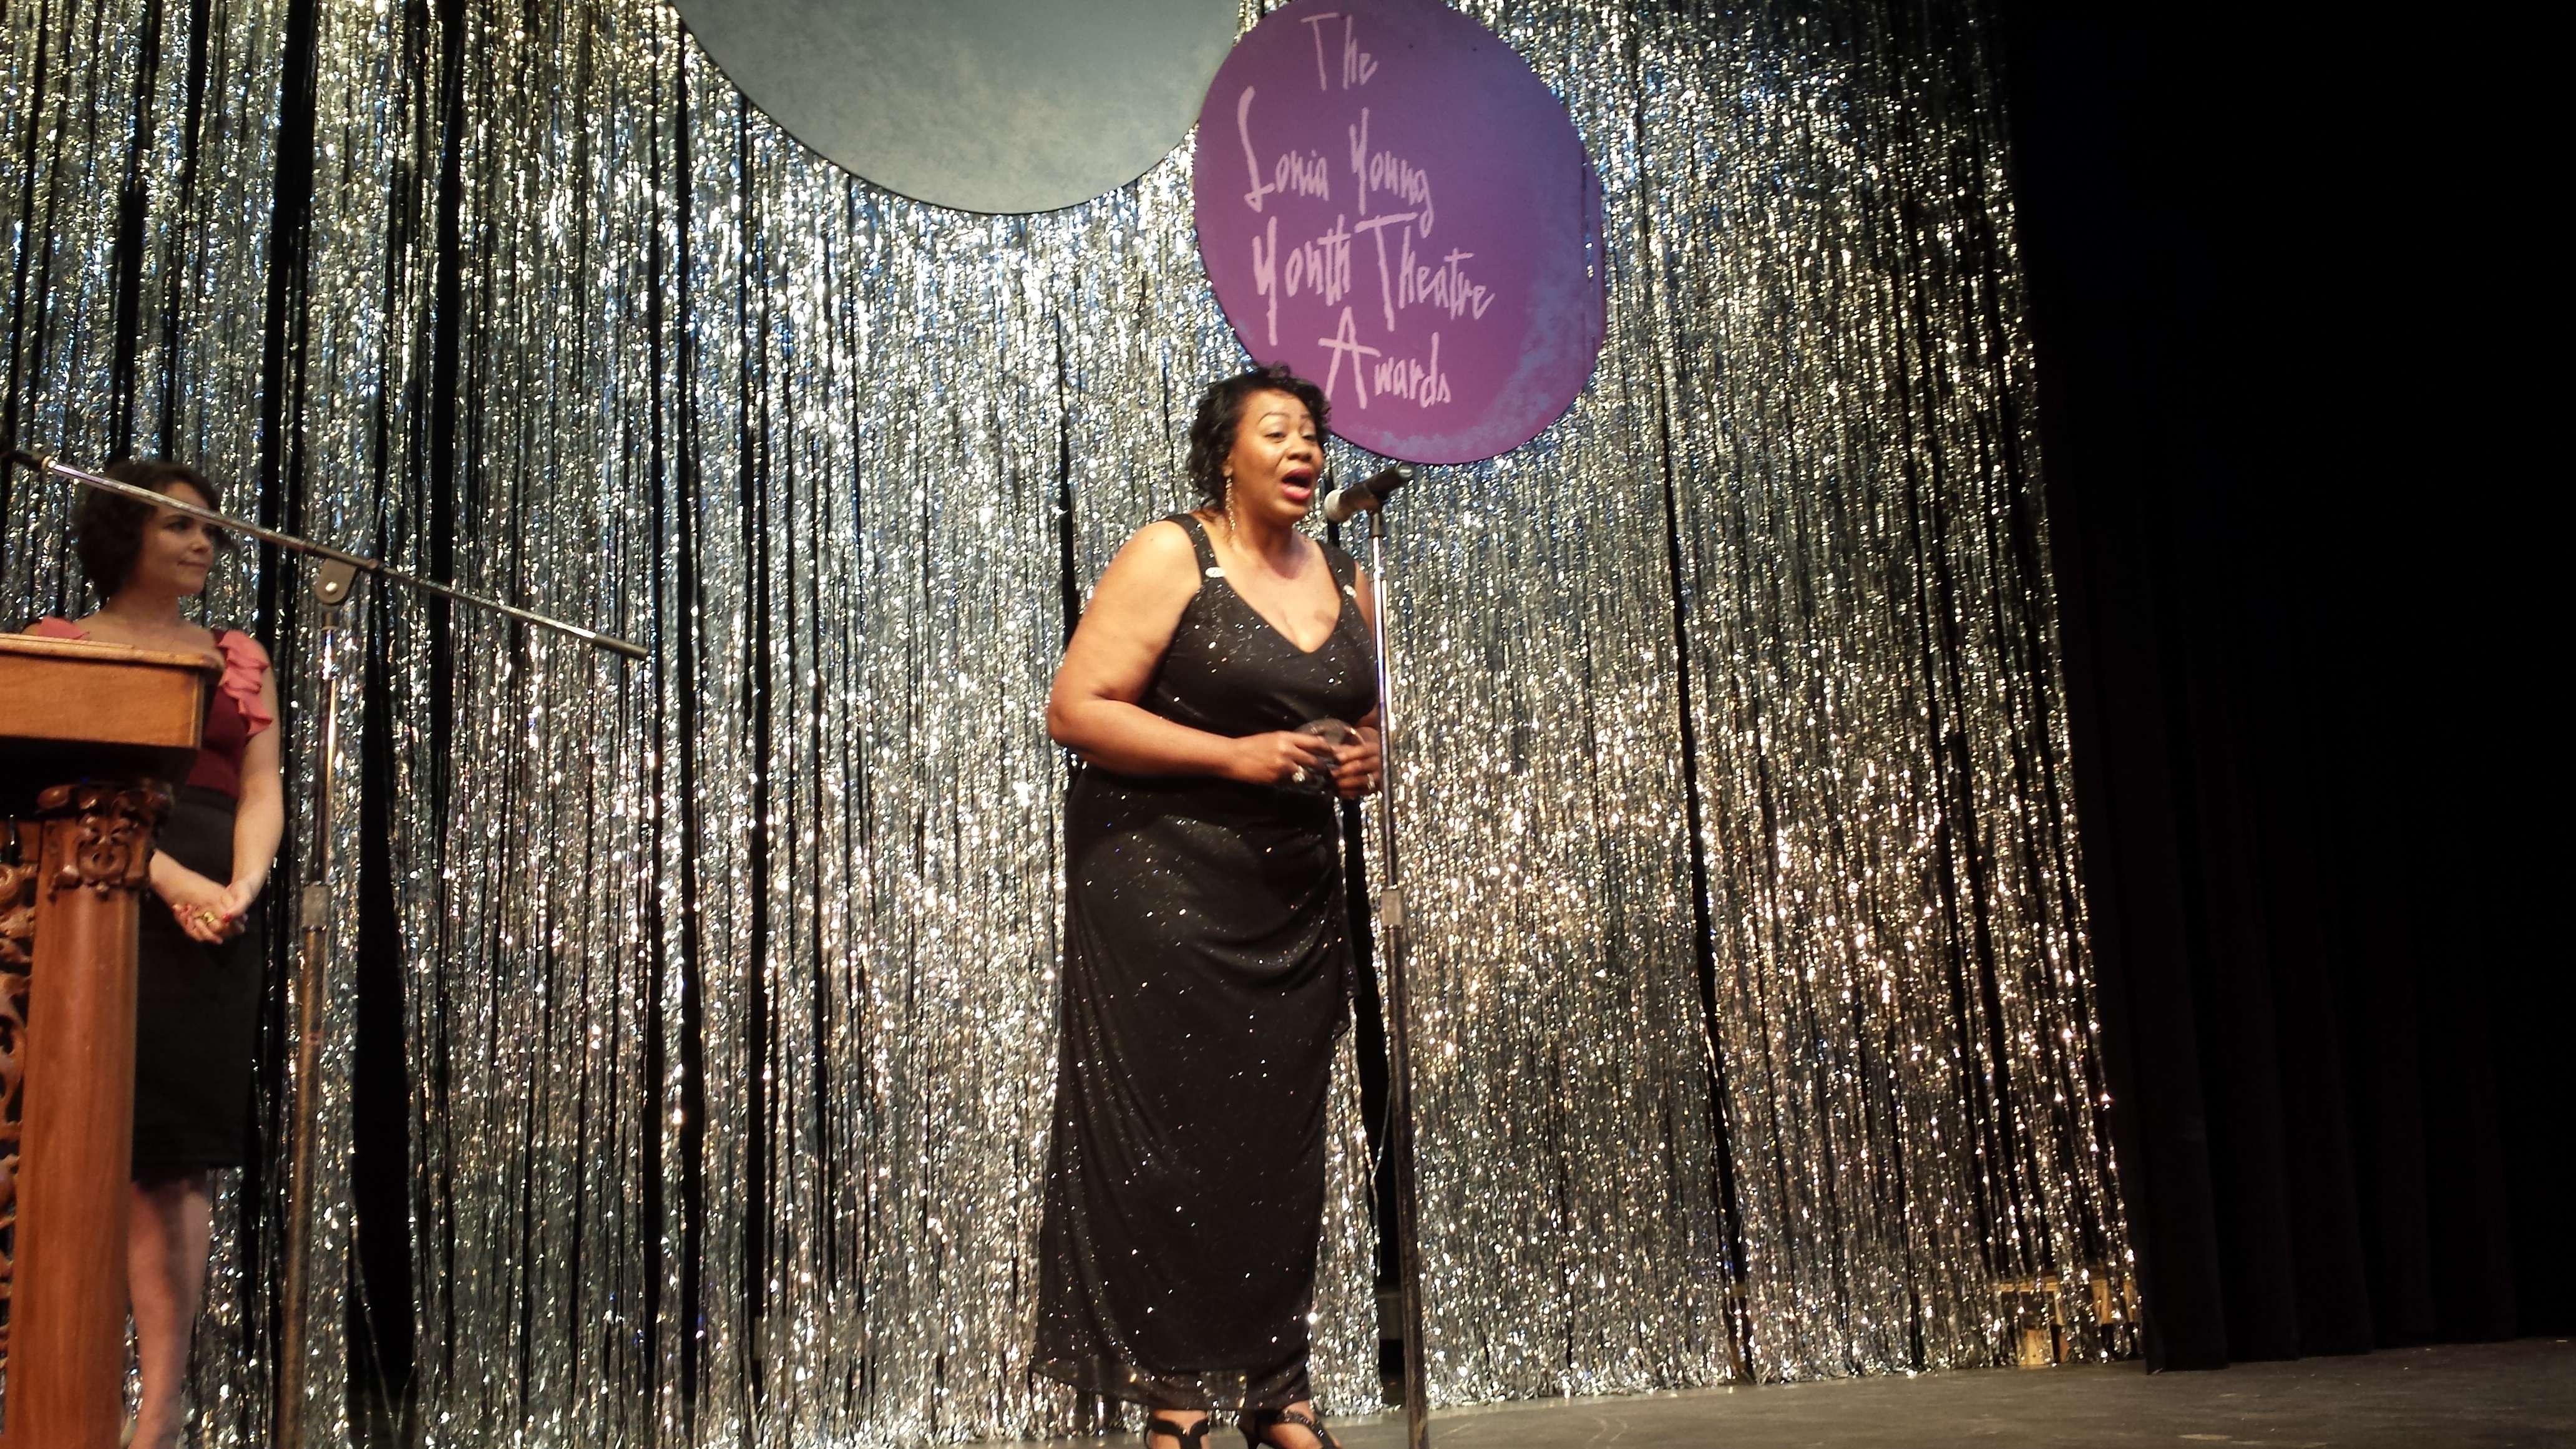 Shelia Wofford acceptance speech after winning her 3rd Miss Annie for Outstanding Supporting Actress Main Stage in 